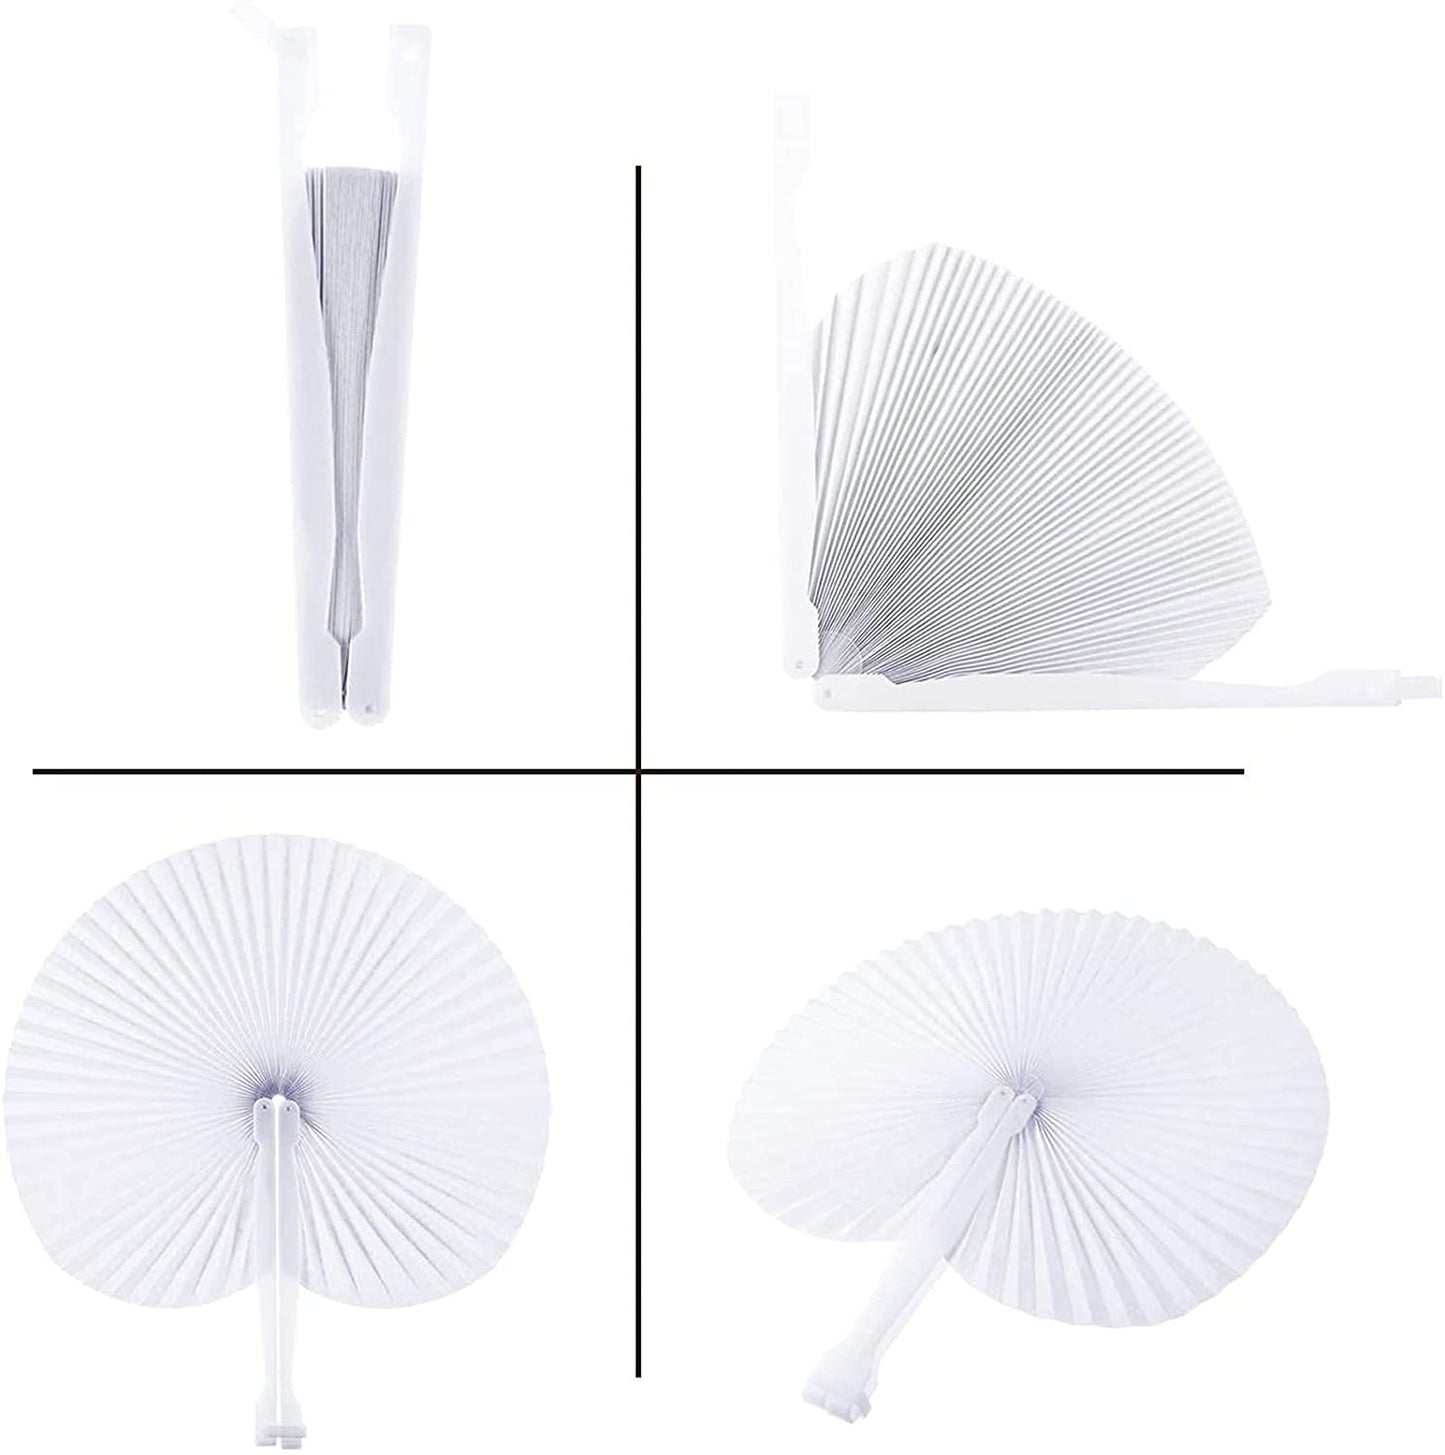 Gejoy 48 Pack Folding Paper Fans Round Accordion Folded Hanging Fans Handheld Assortment for Wedding Favor Birthday Baby Shower Party Bag Filler, White - (For 6 piece(s))